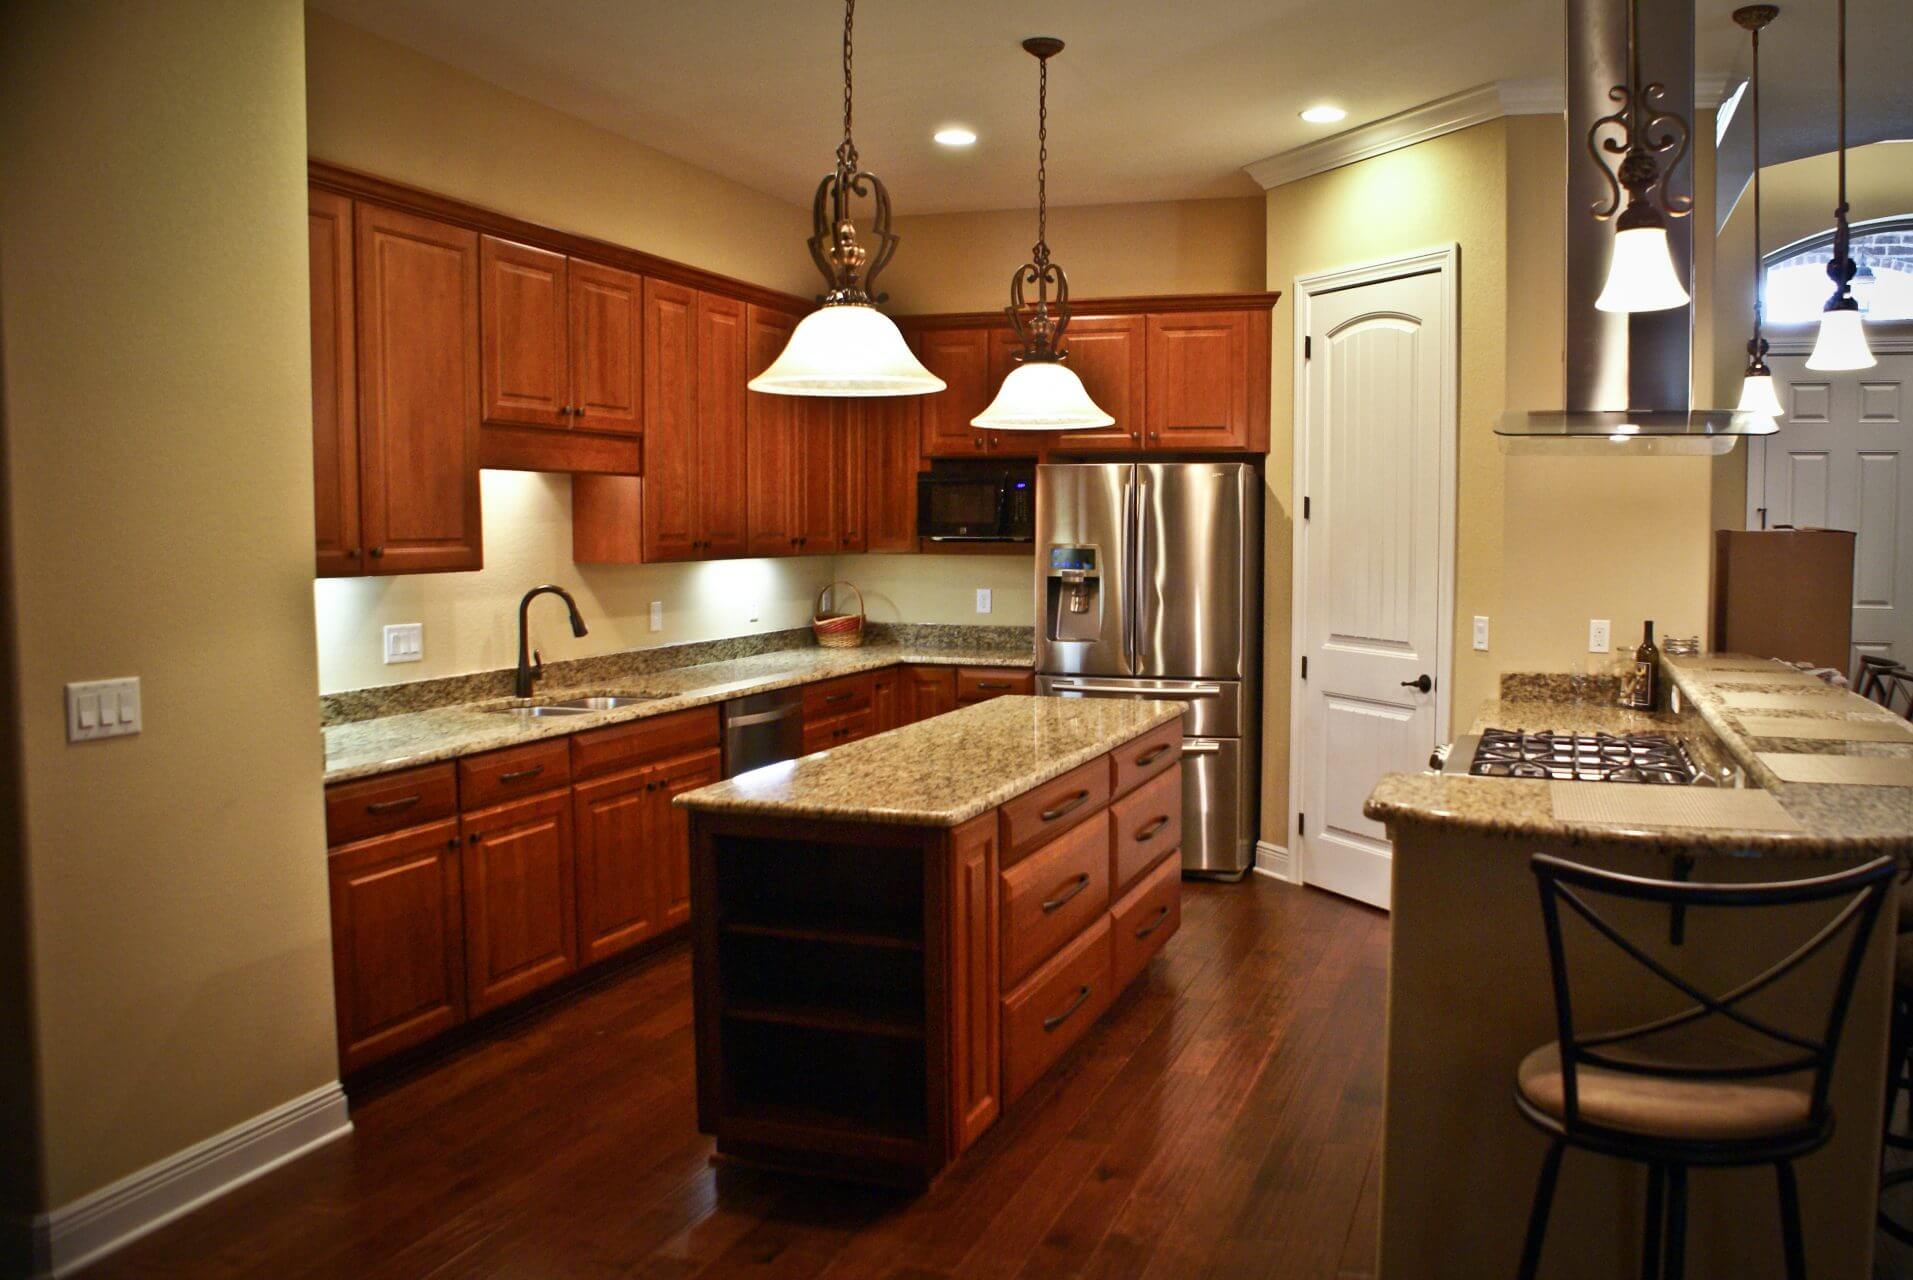 Transitional kitchen with rich wood cabinets, granite countertops and wood floors